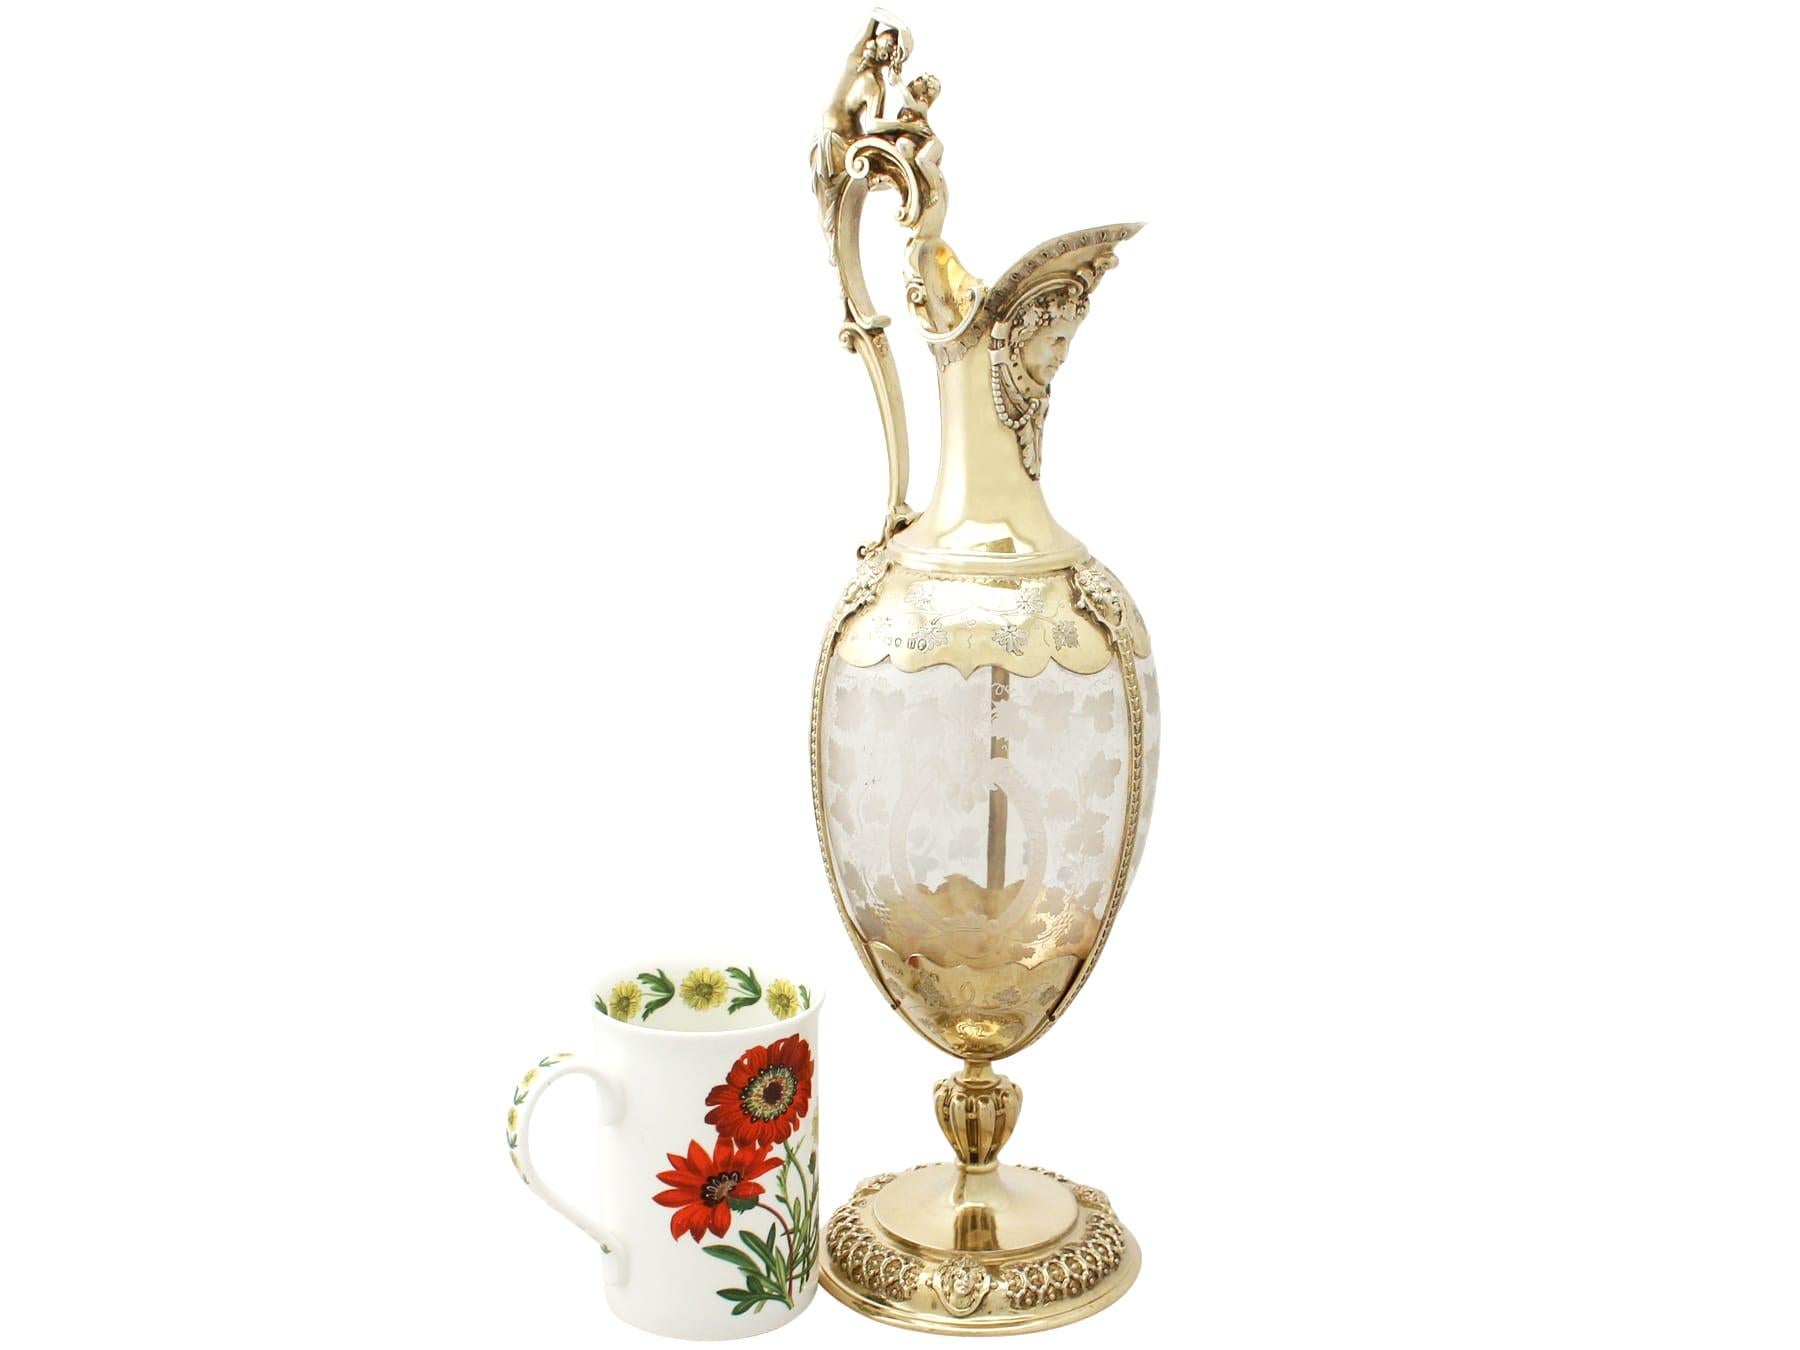 A magnificent, fine and impressive antique Victorian English acid etched glass and sterling silver gilt claret jug; an addition to our wine and drinks related silverware collection.

This magnificent antique Victorian glass and sterling silver